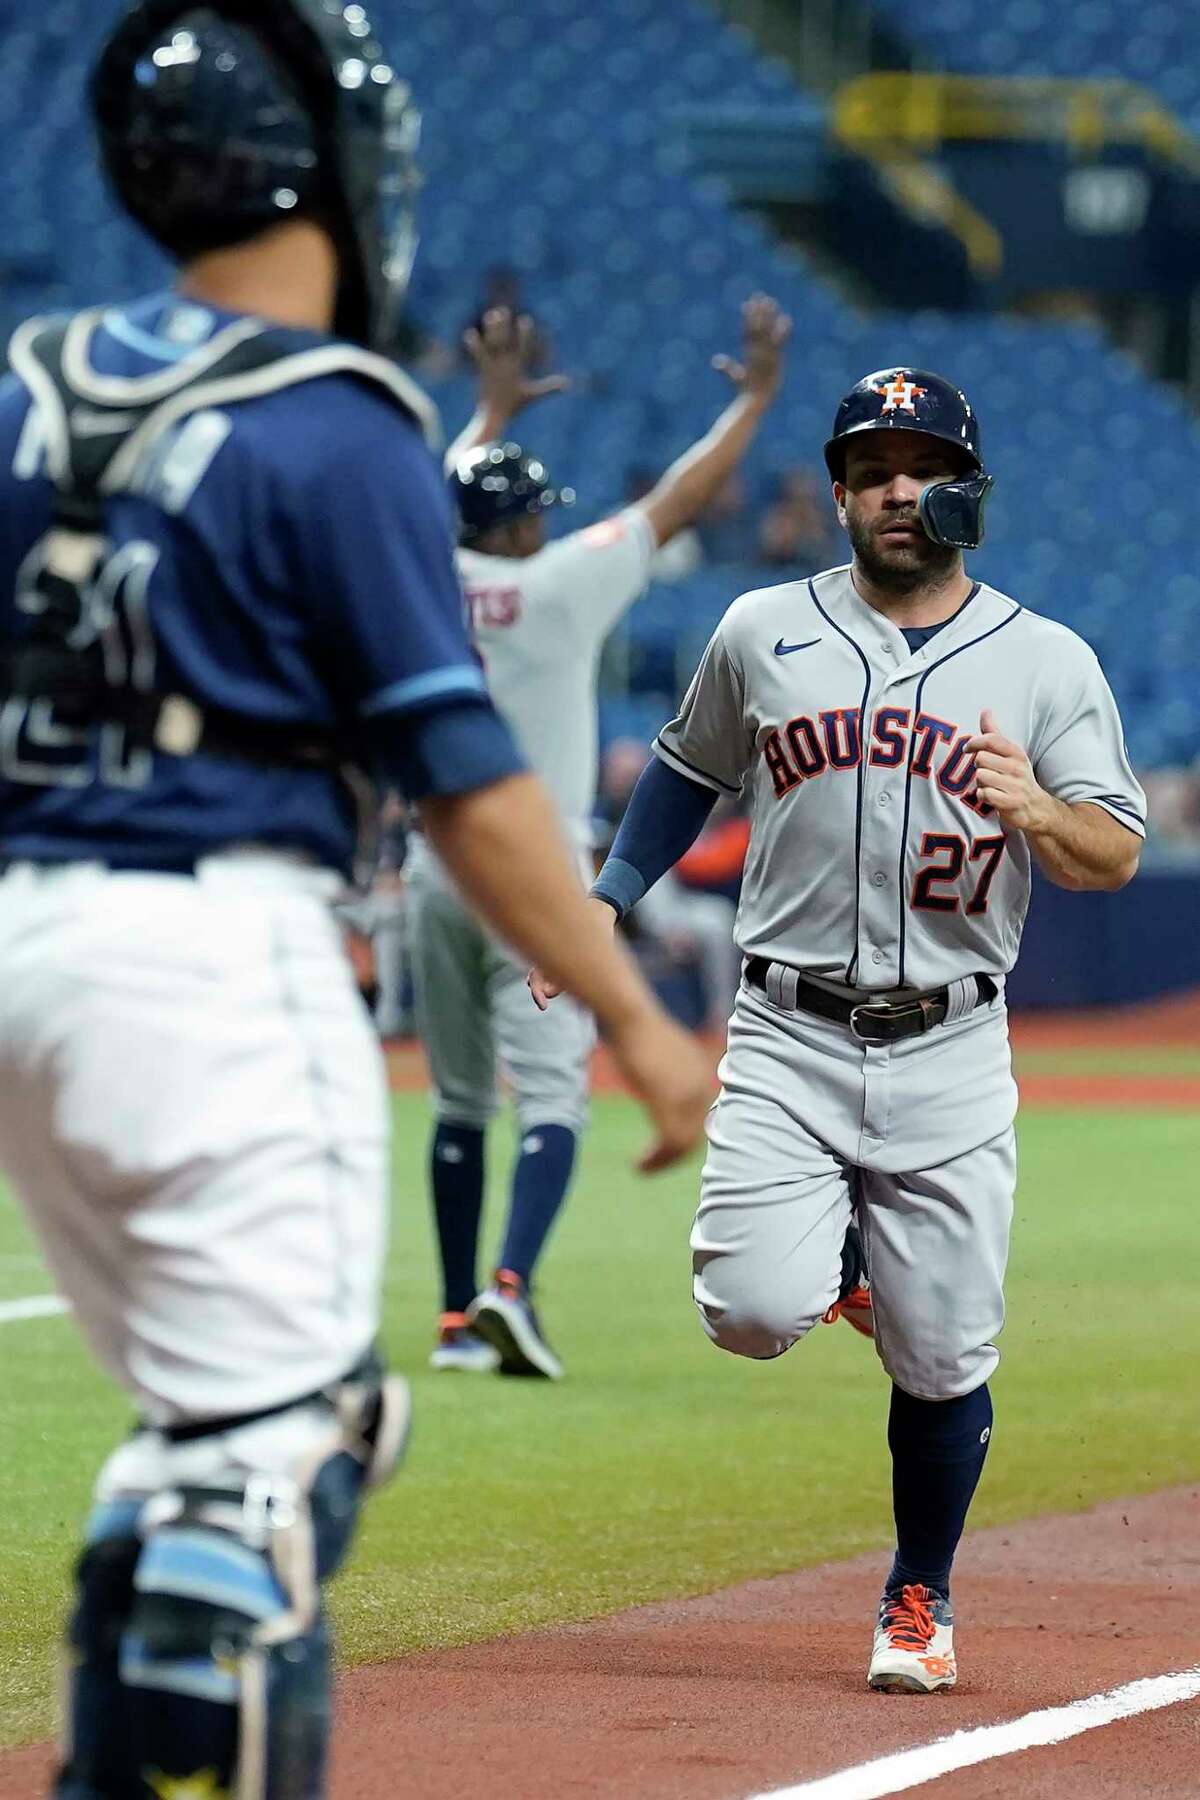 Houston Astros' Jose Altuve scores in front of Tampa Bay Rays catcher Francisco Mejia on an RBI double by Kyle Tucker during the first inning of a baseball game Tuesday, Sept. 20, 2022, in St. Petersburg, Fla. (AP Photo/Chris O'Meara)